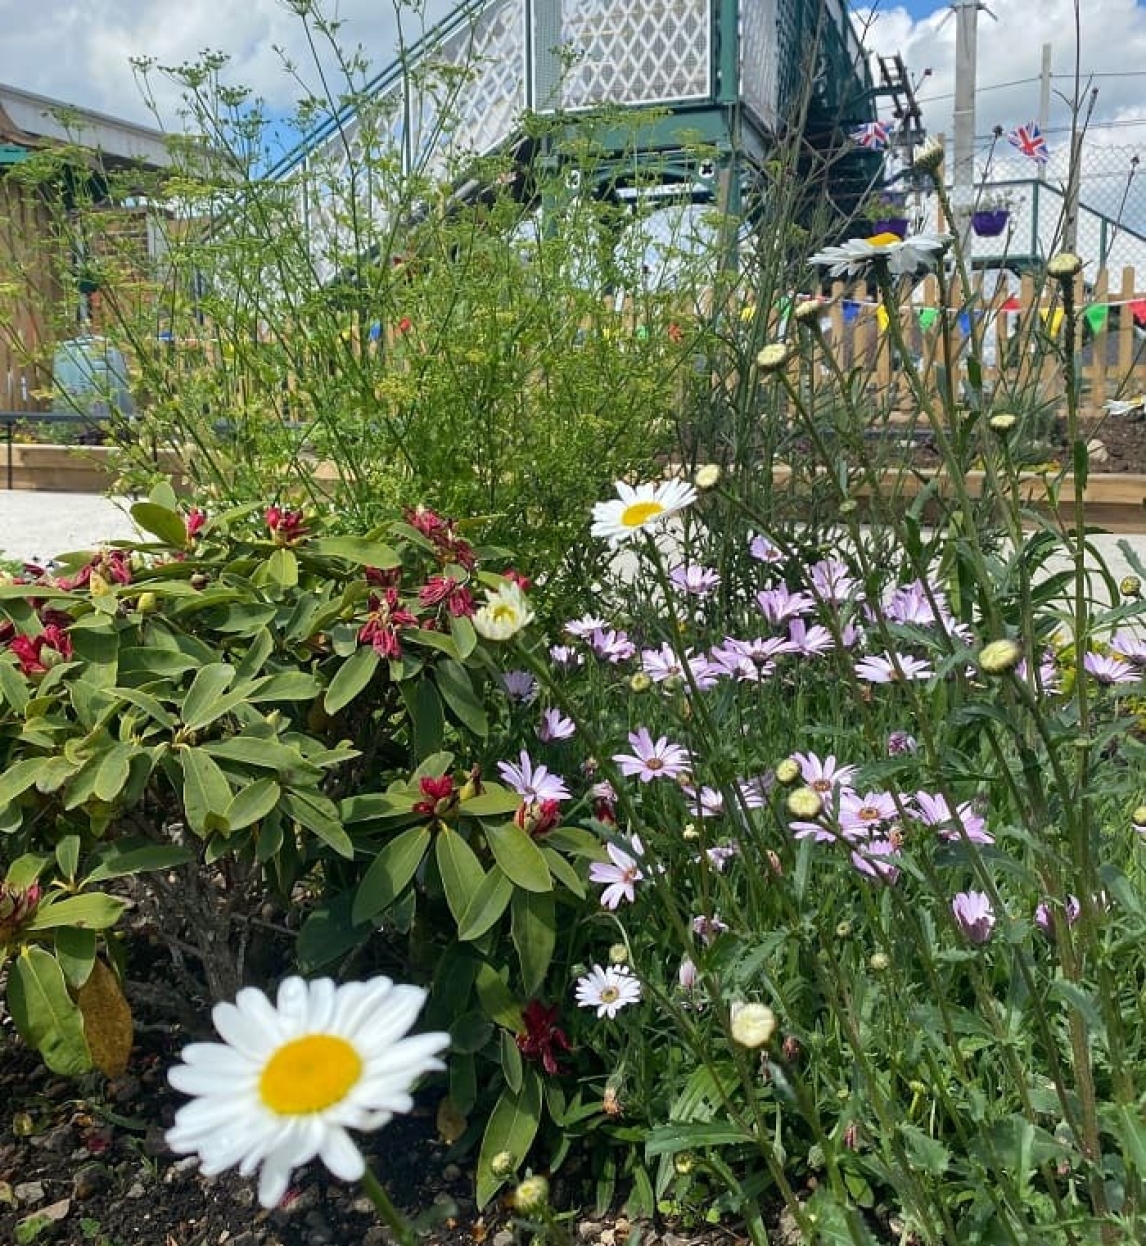 Daisies in Rayleigh station's new garden